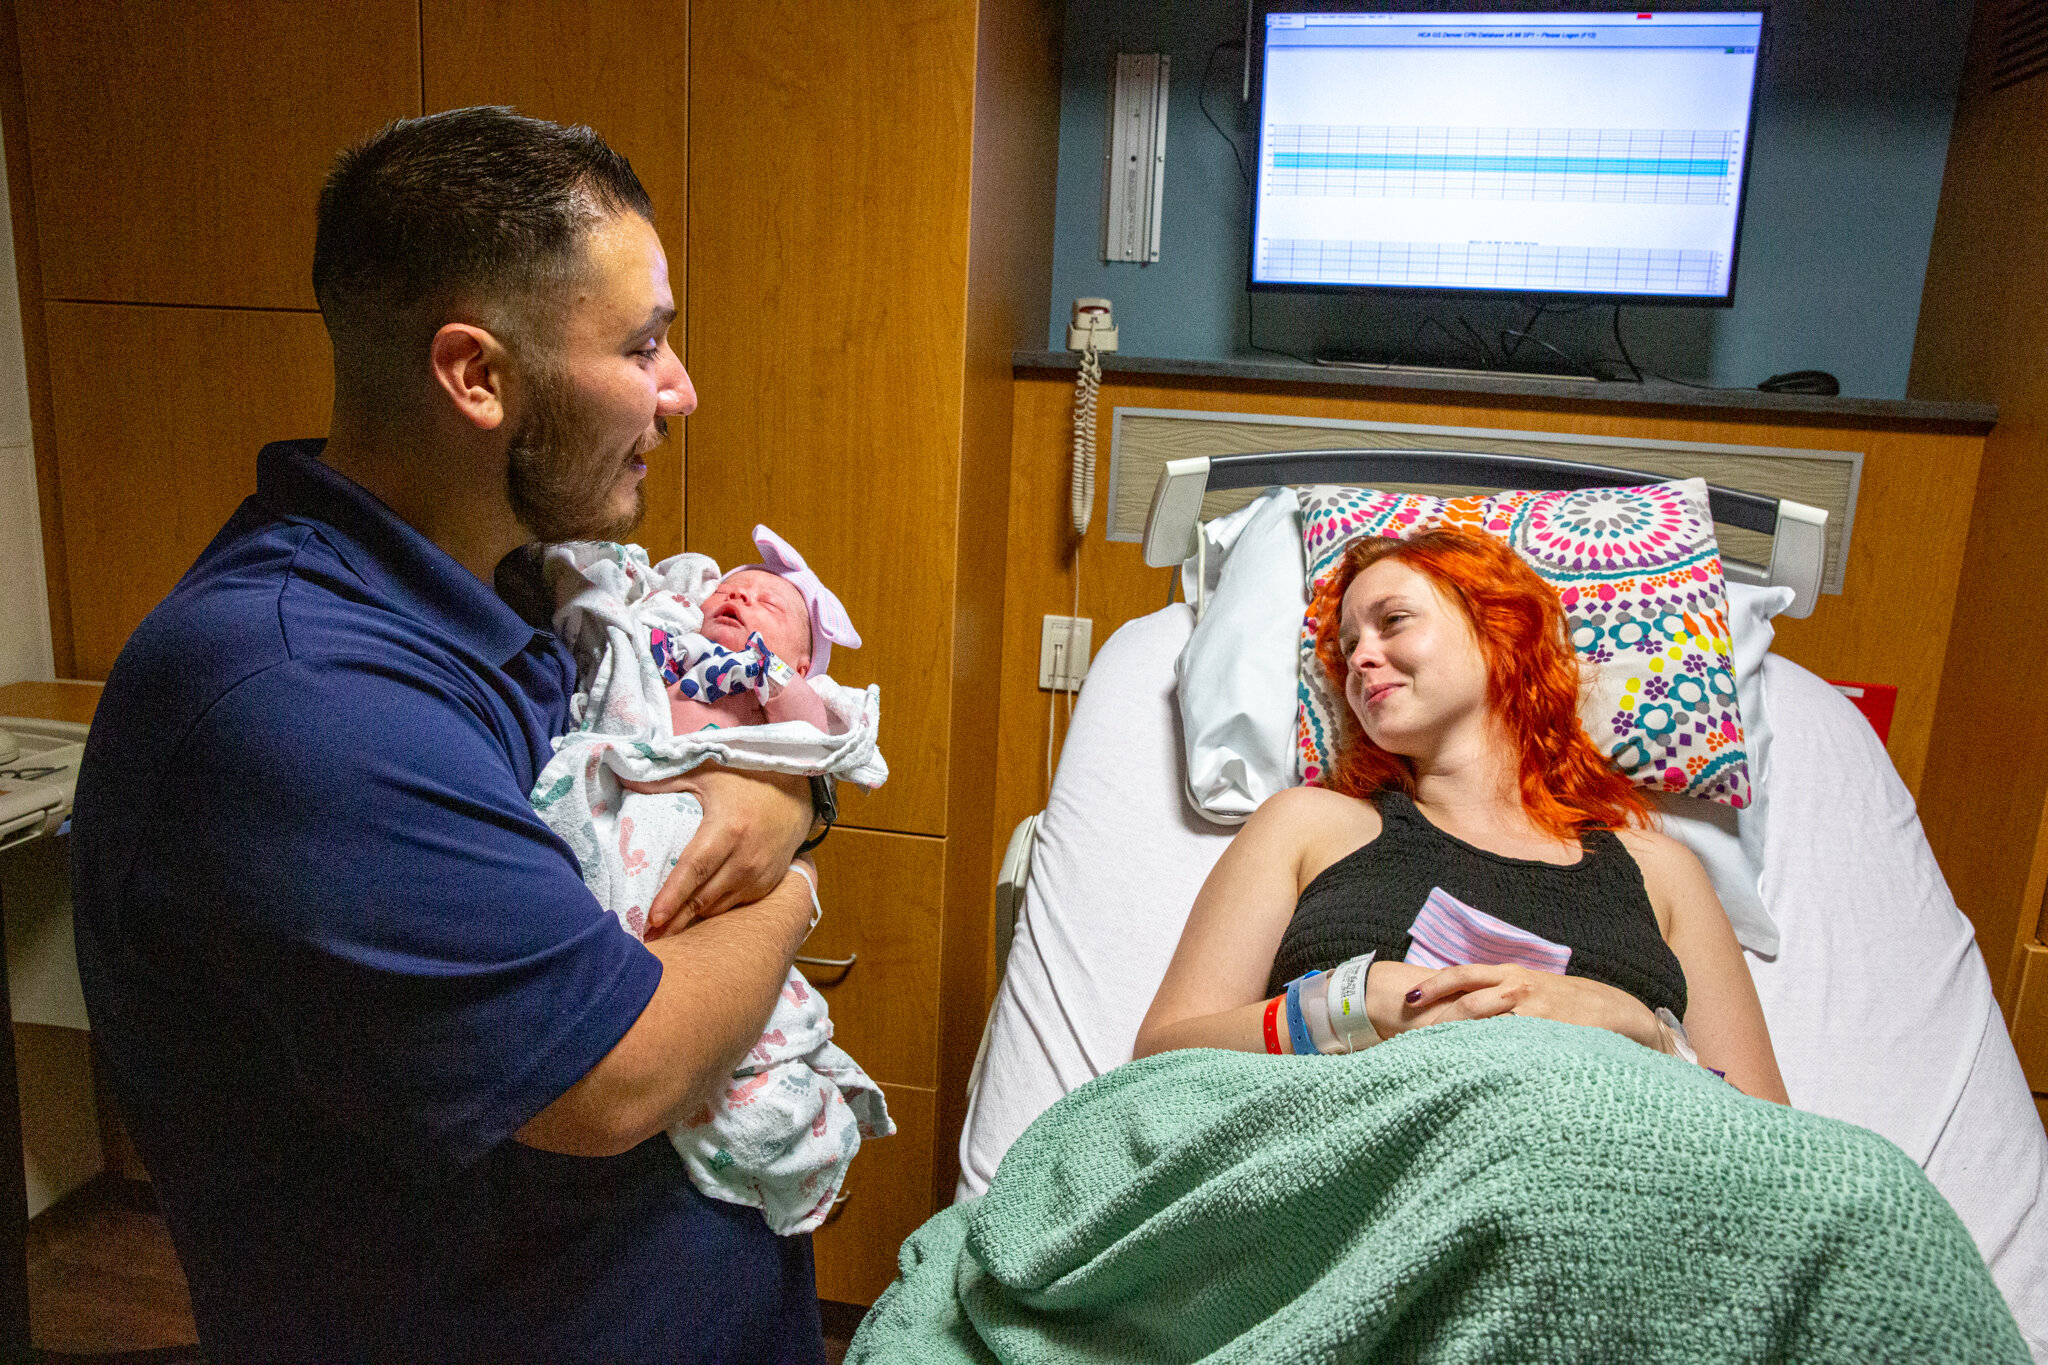 Dad holding baby and mom is hospital bed laughing